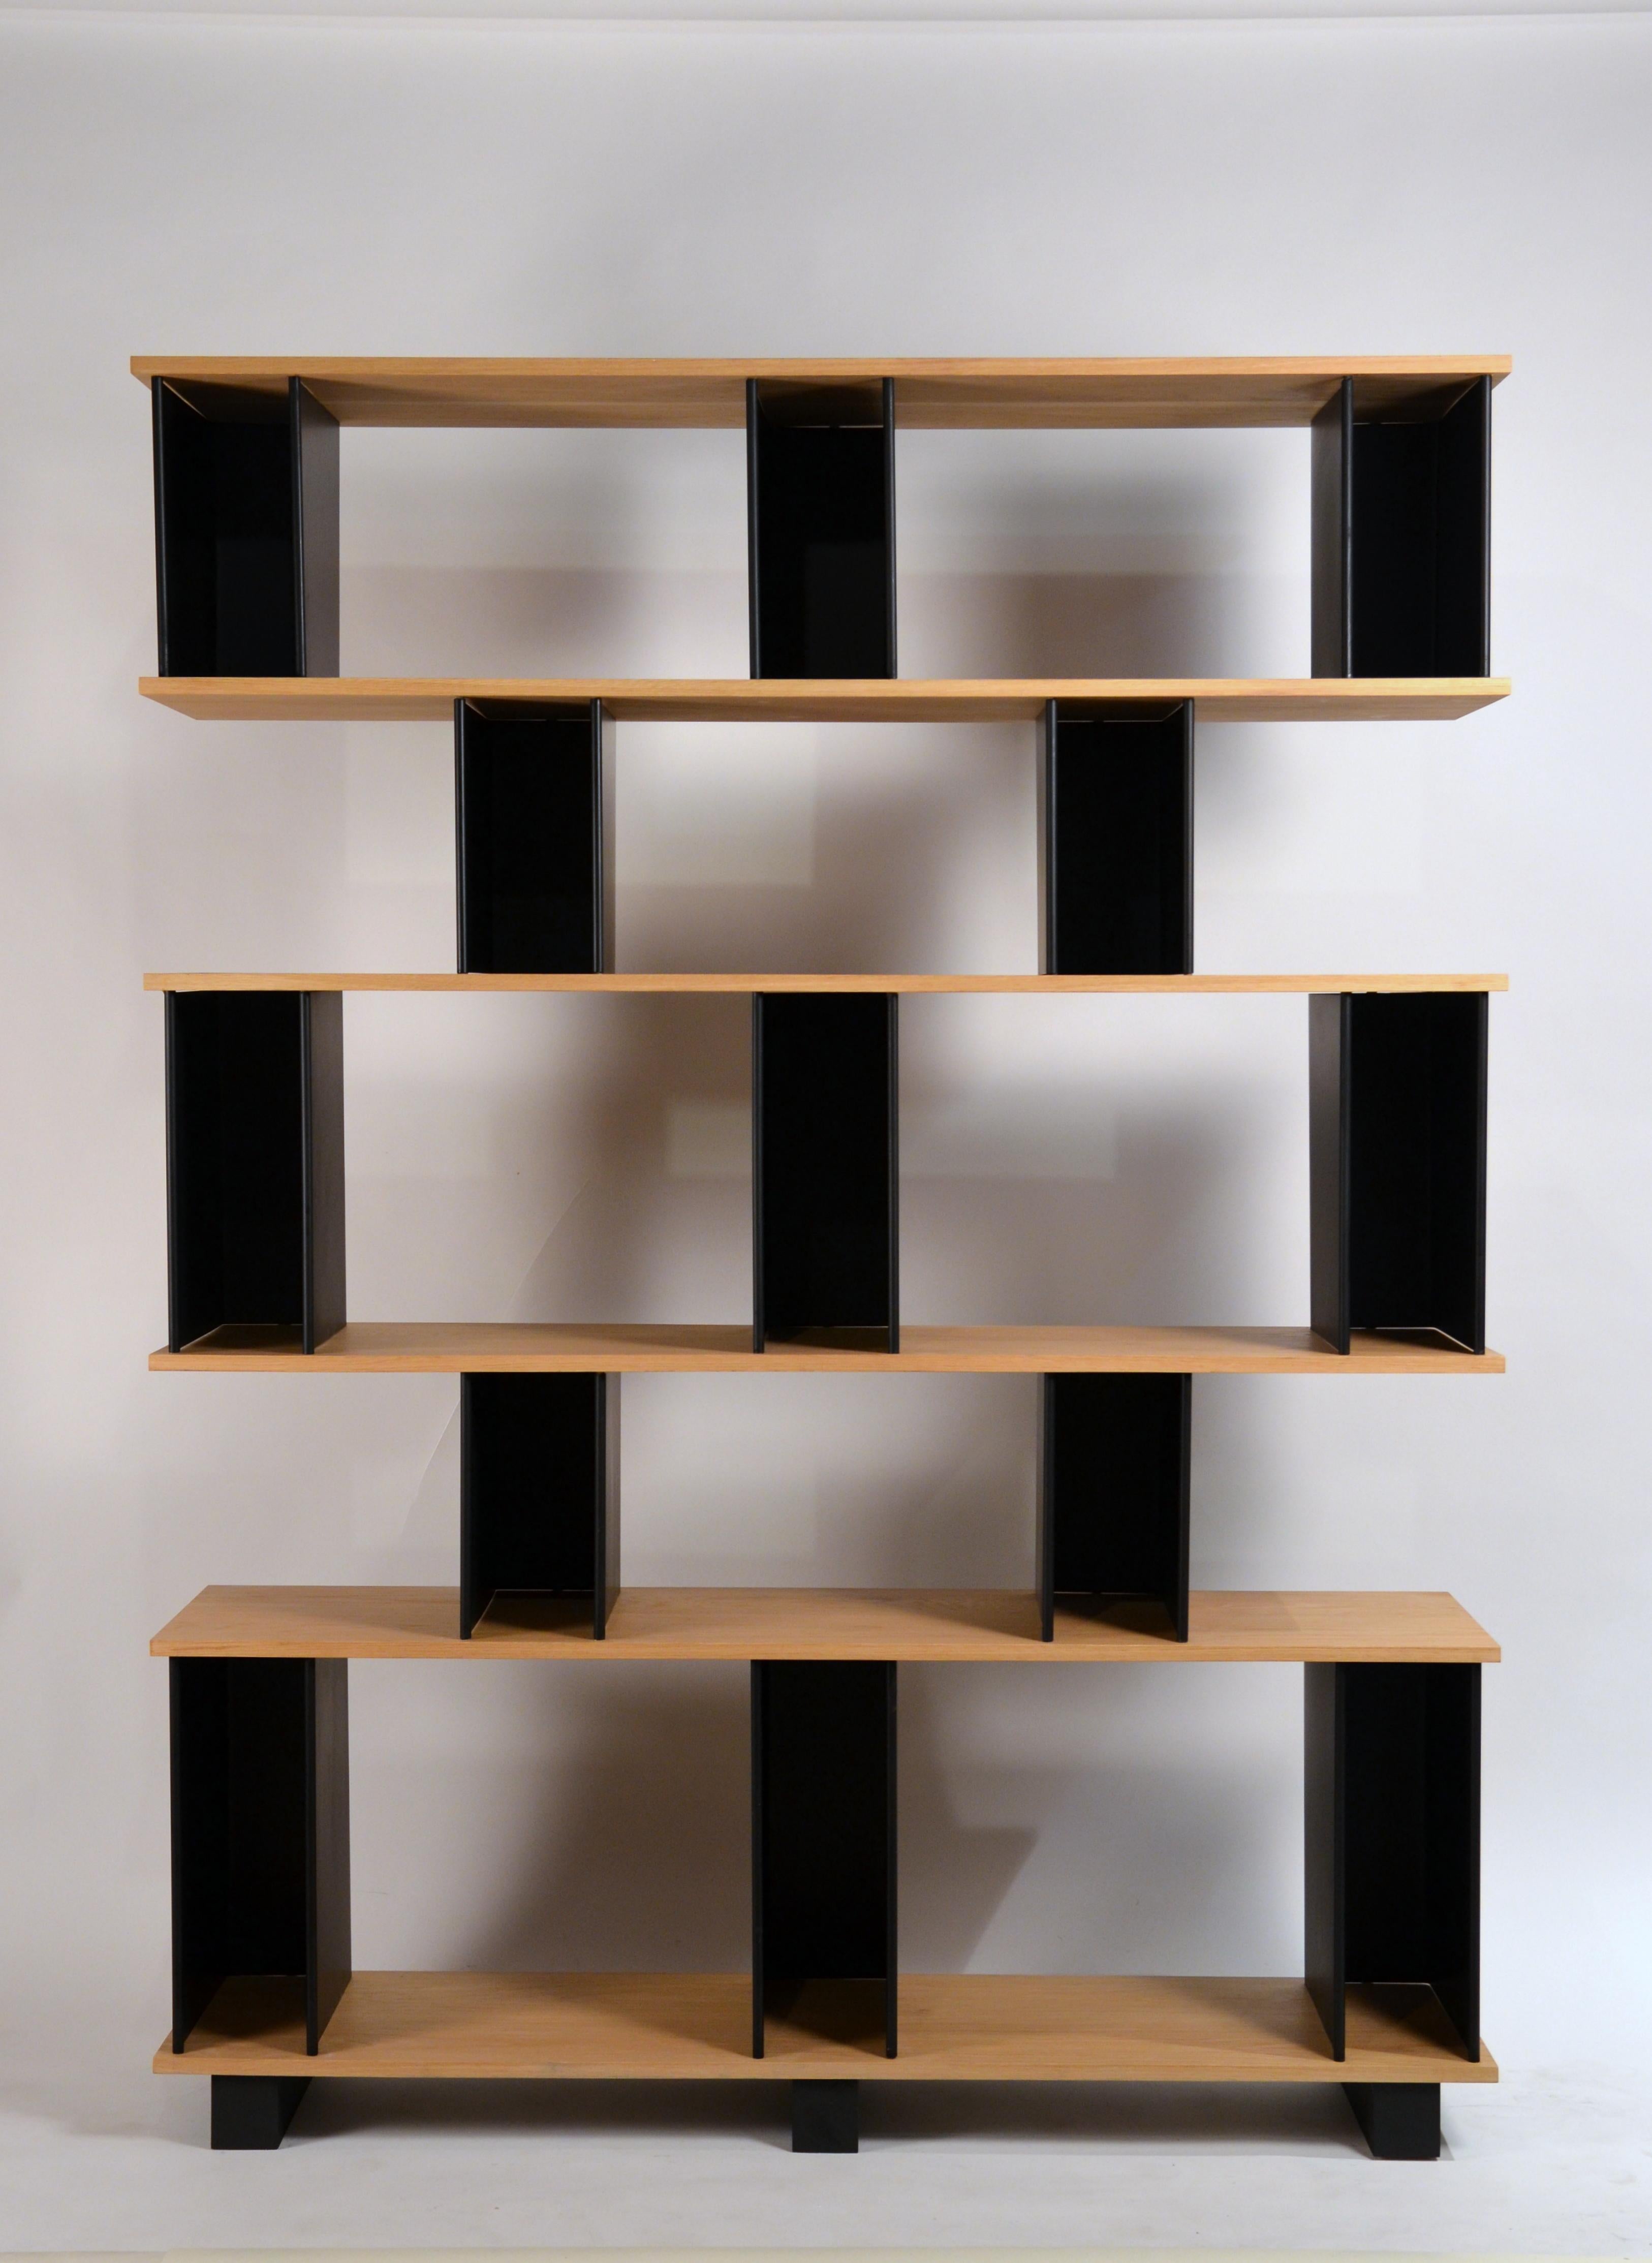 Tall 'Horizontale' black steel and oak shelving unit / bookcase by Design Frères.

Polished and sealed white oak shelves interspaced with black steel elements. Sculptural and functional.

Comes in 3 'sandwiches' and 4 middle elements for easy